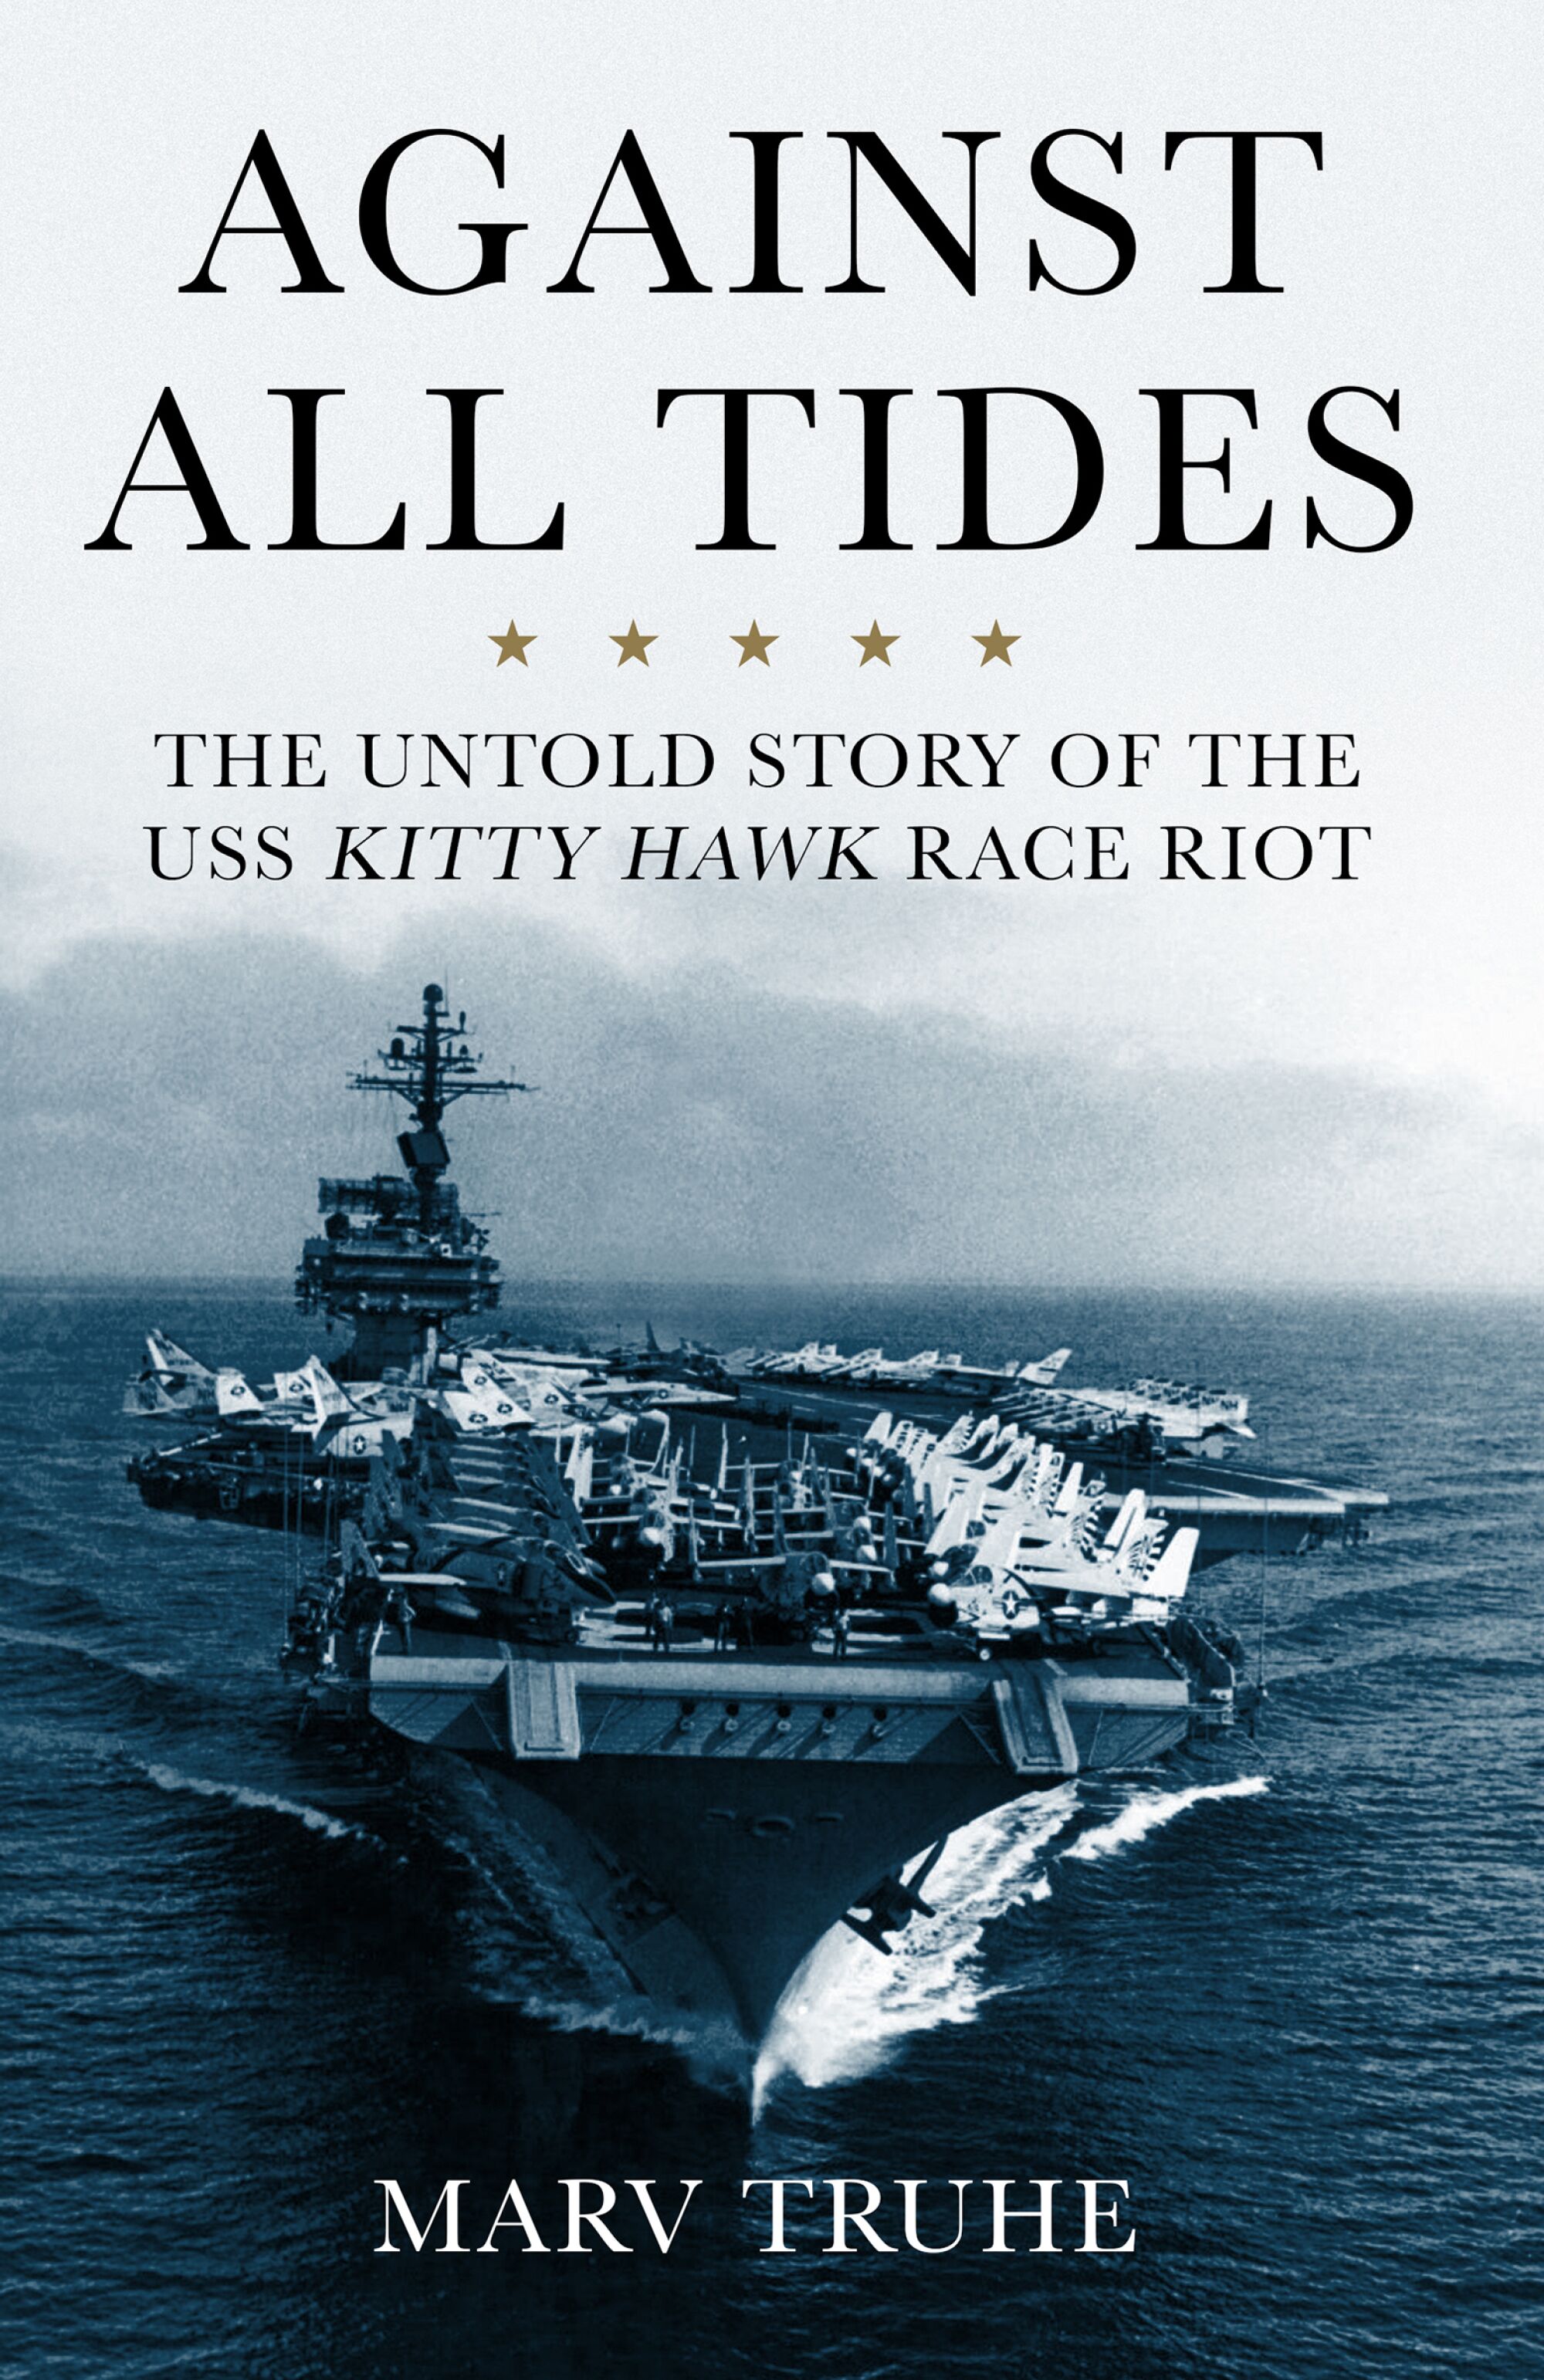 "Against All Tides: The Untold Story of the USS Kitty Hawk Race Riot," by Marc Truhe.